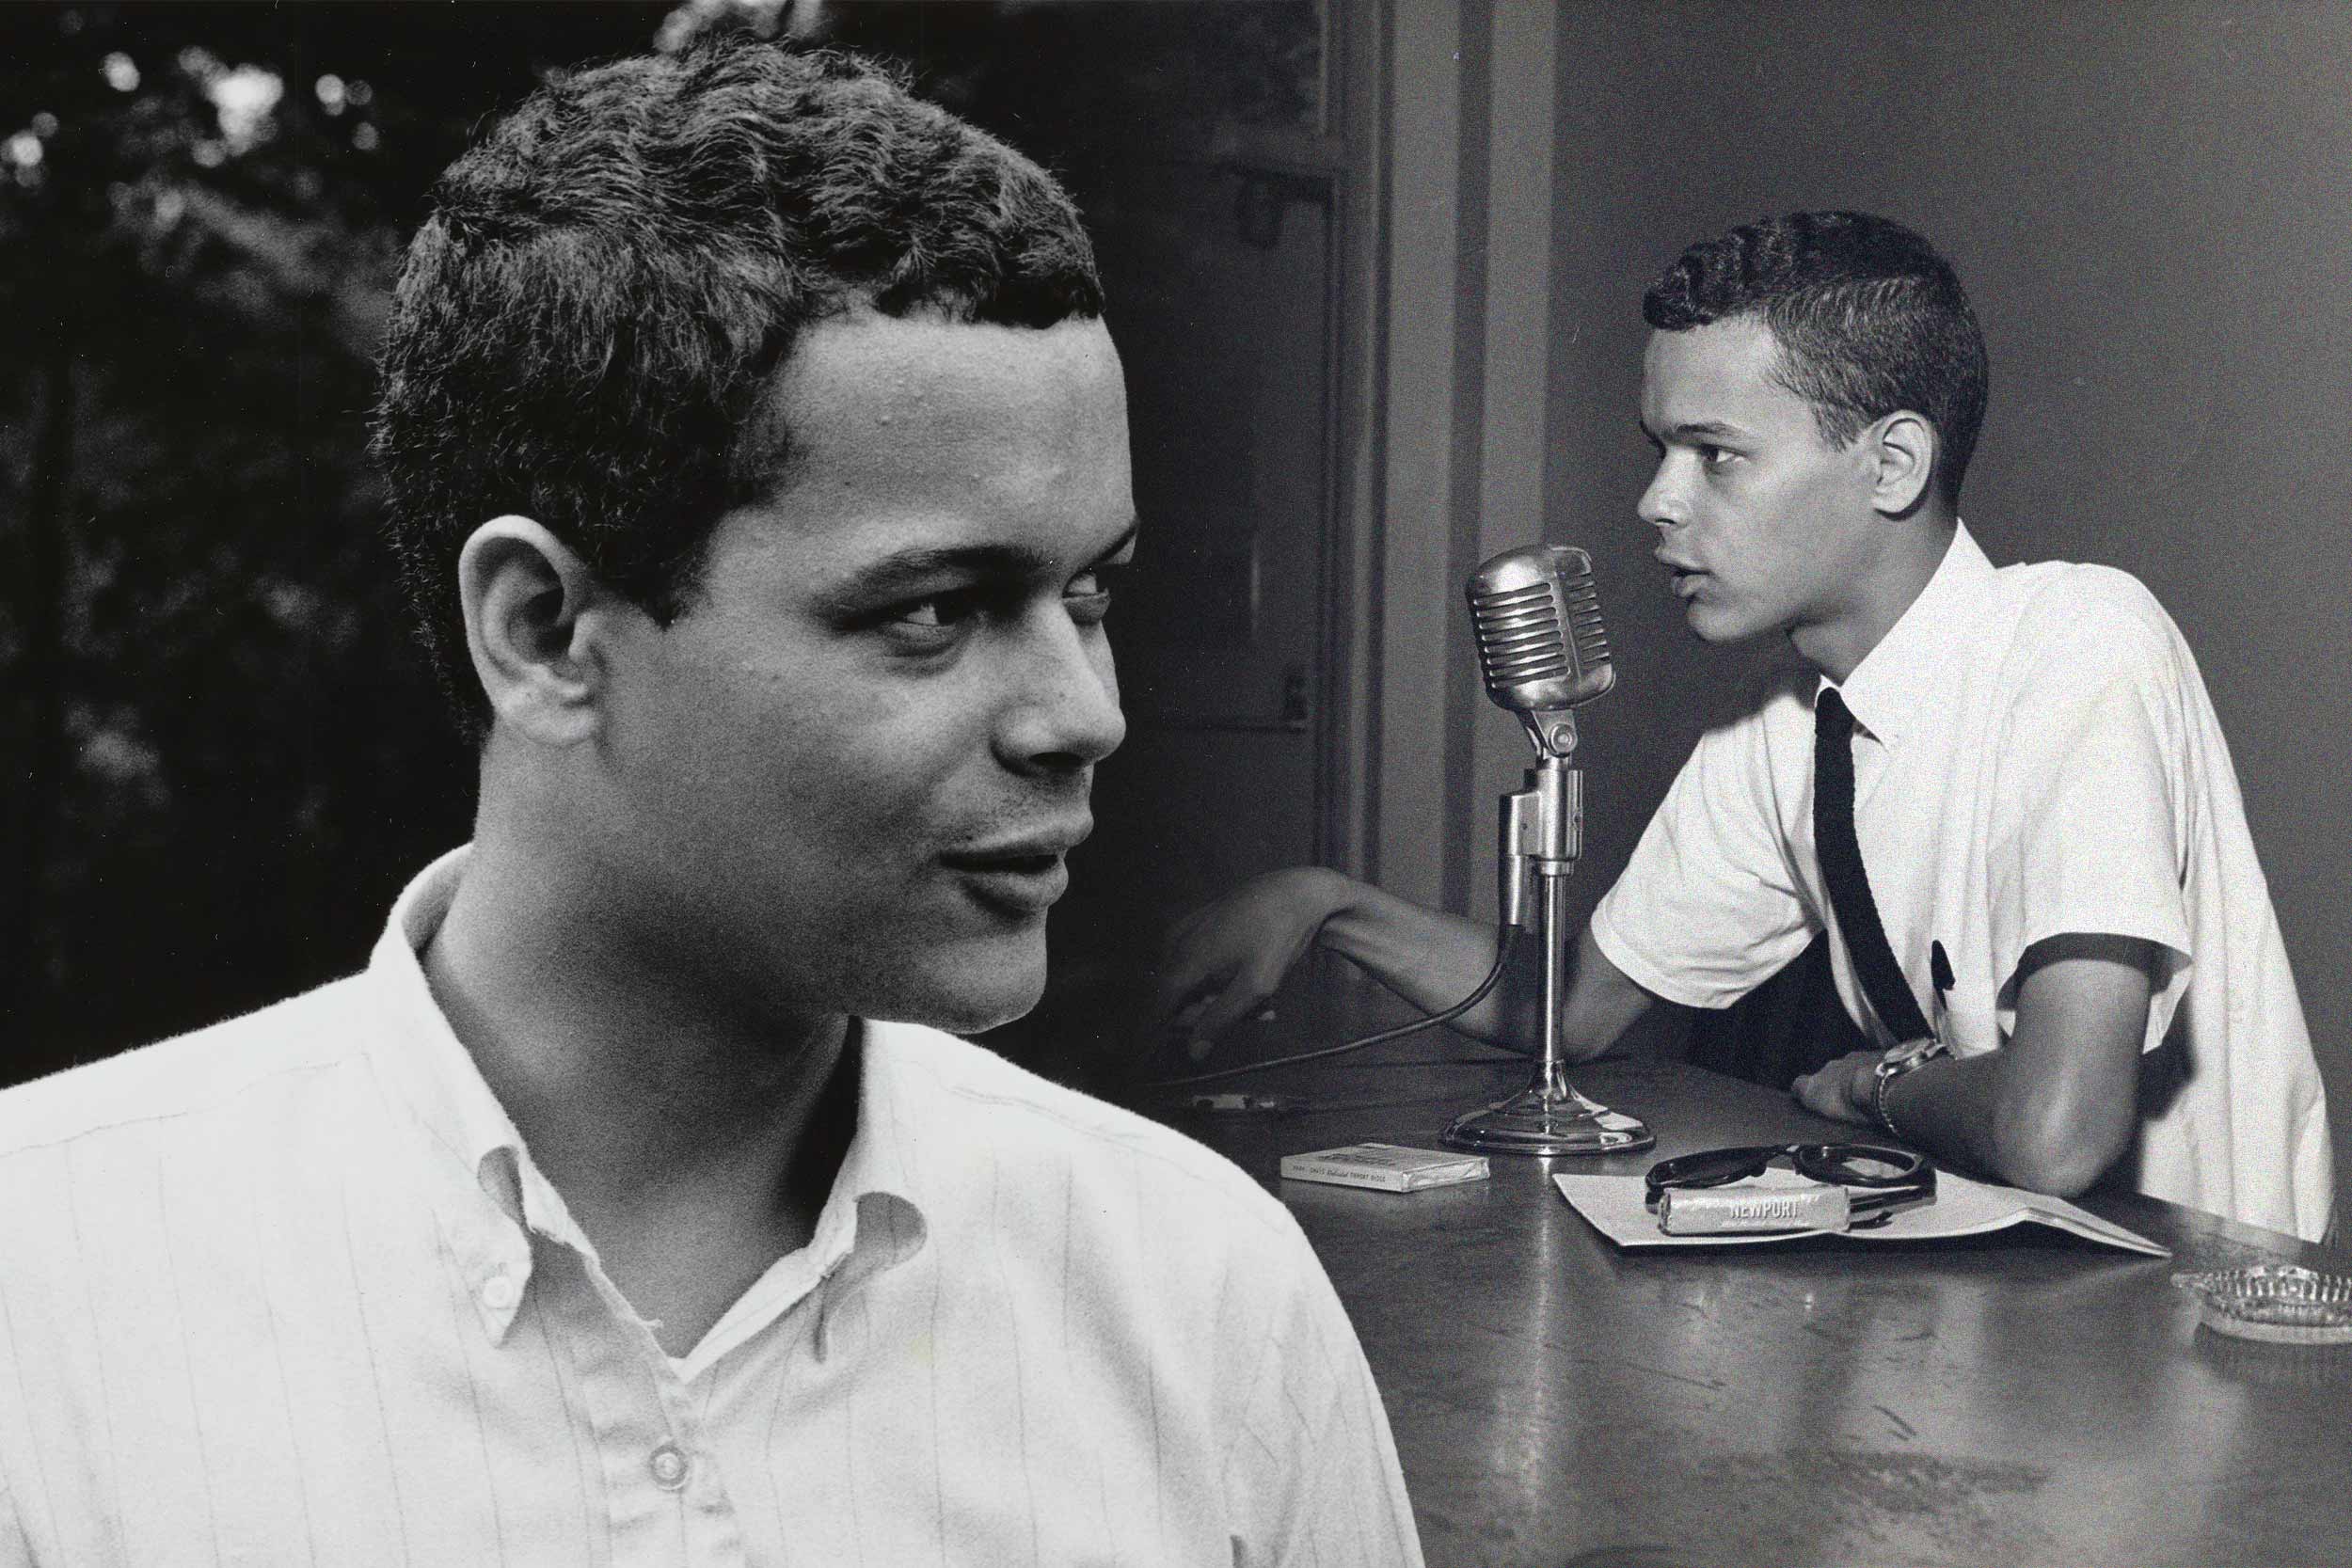 From organizing the Student Nonviolent Coordinating Committee in college to serving in the Georgia legislature to teaching at UVA, Julian Bond led a multifaceted career in politics and social activism over five decades. (Courtesy of Julian Bond Papers Project)